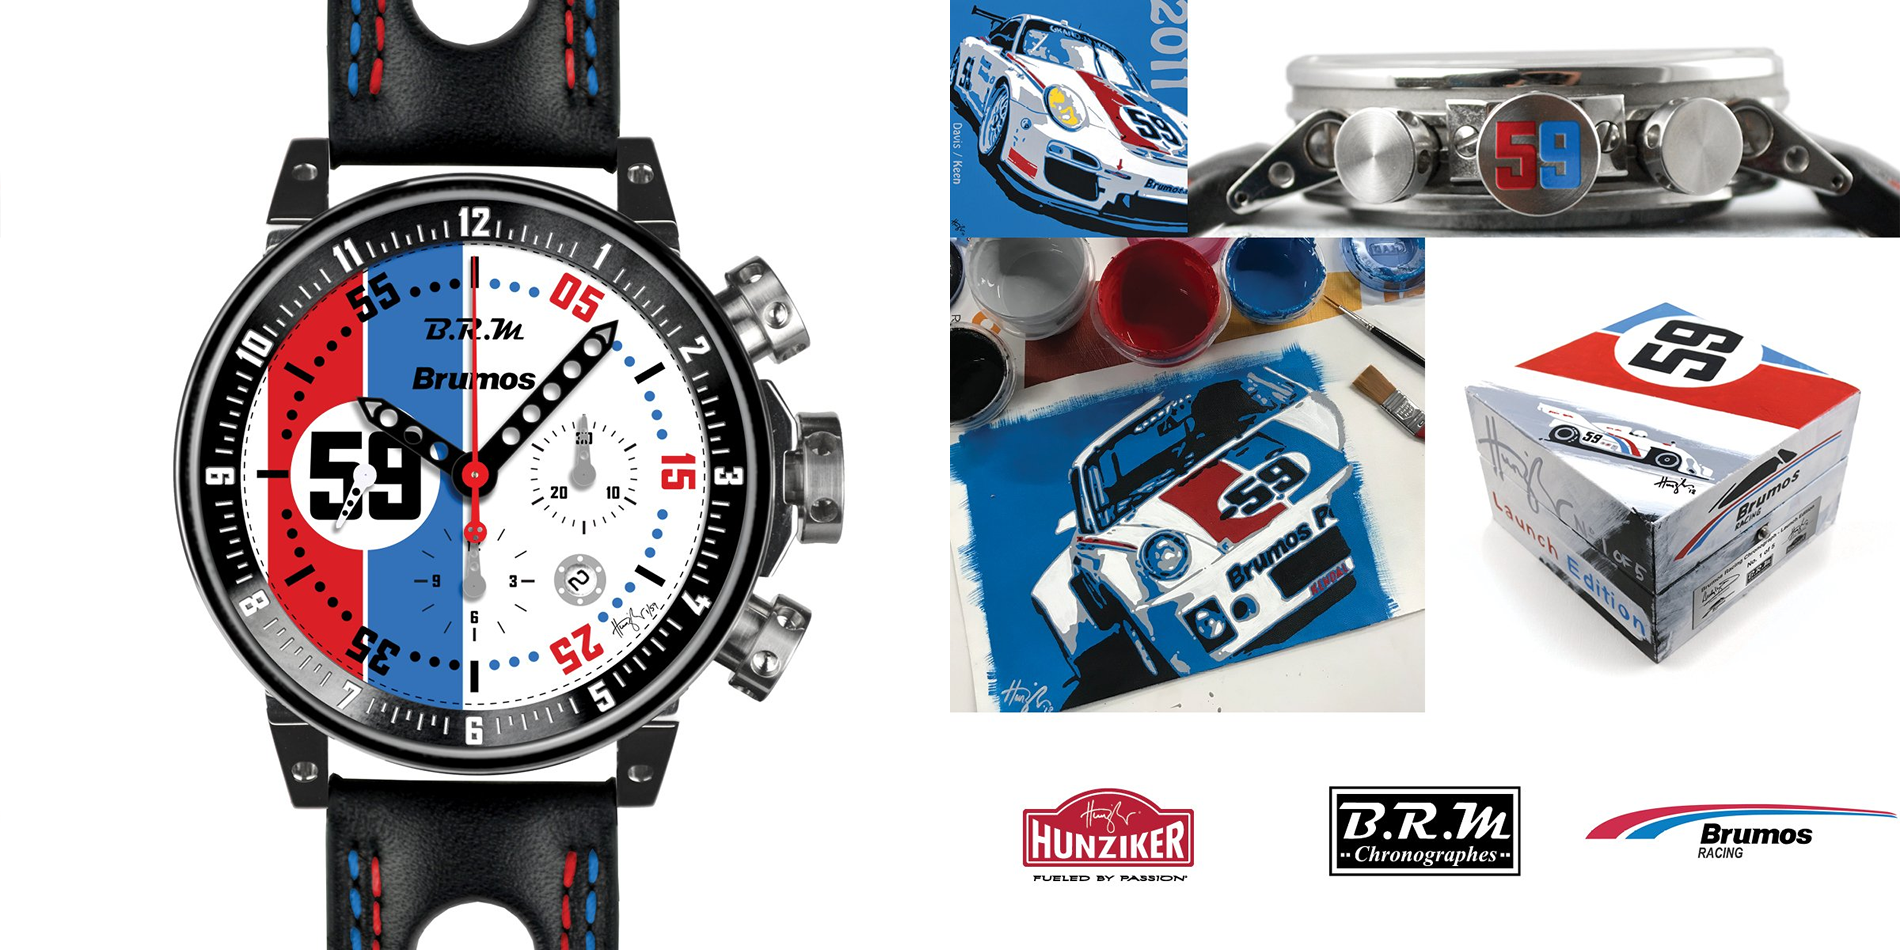 BRM, Nicolas Hunziker and Brumos Racing Release Limited-Edition Timepiece Collection